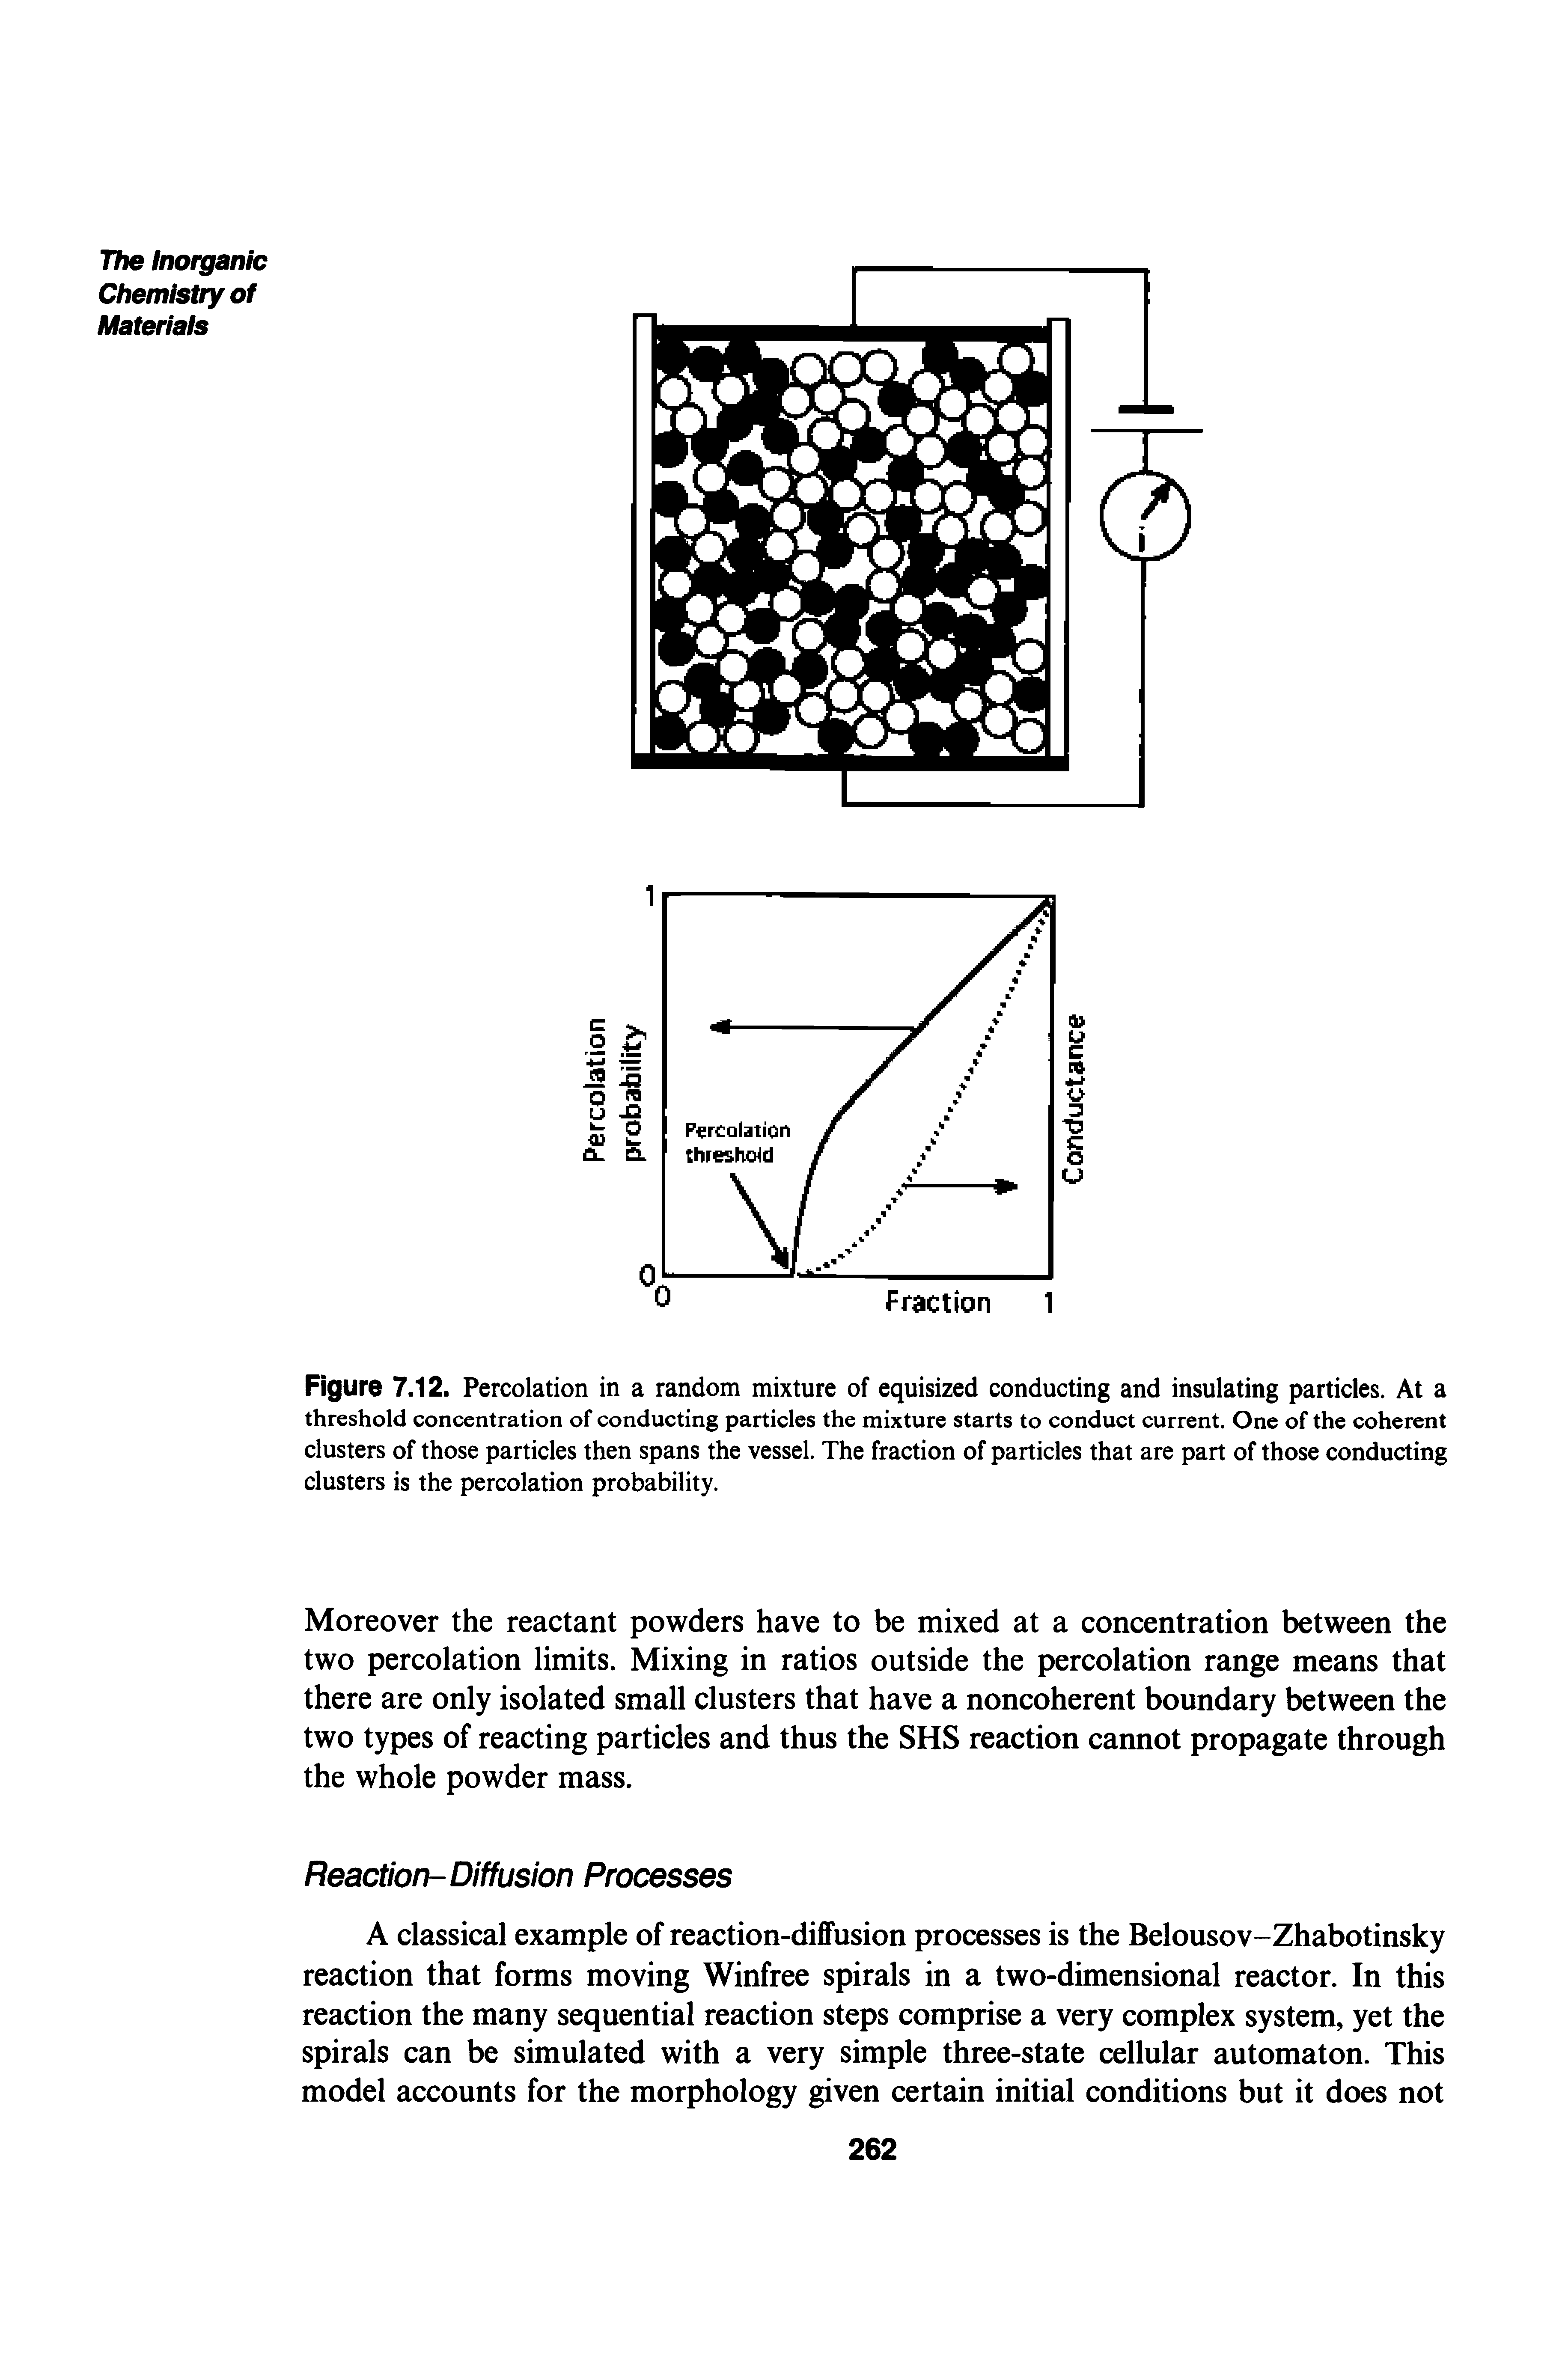 Figure 7.12. Percolation in a random mixture of equisized conducting and insulating particles. At a threshold concentration of conducting particles the mixture starts to conduct current. One of the coherent clusters of those particles then spans the vessel. The fraction of particles that are part of those conducting clusters is the percolation probability.